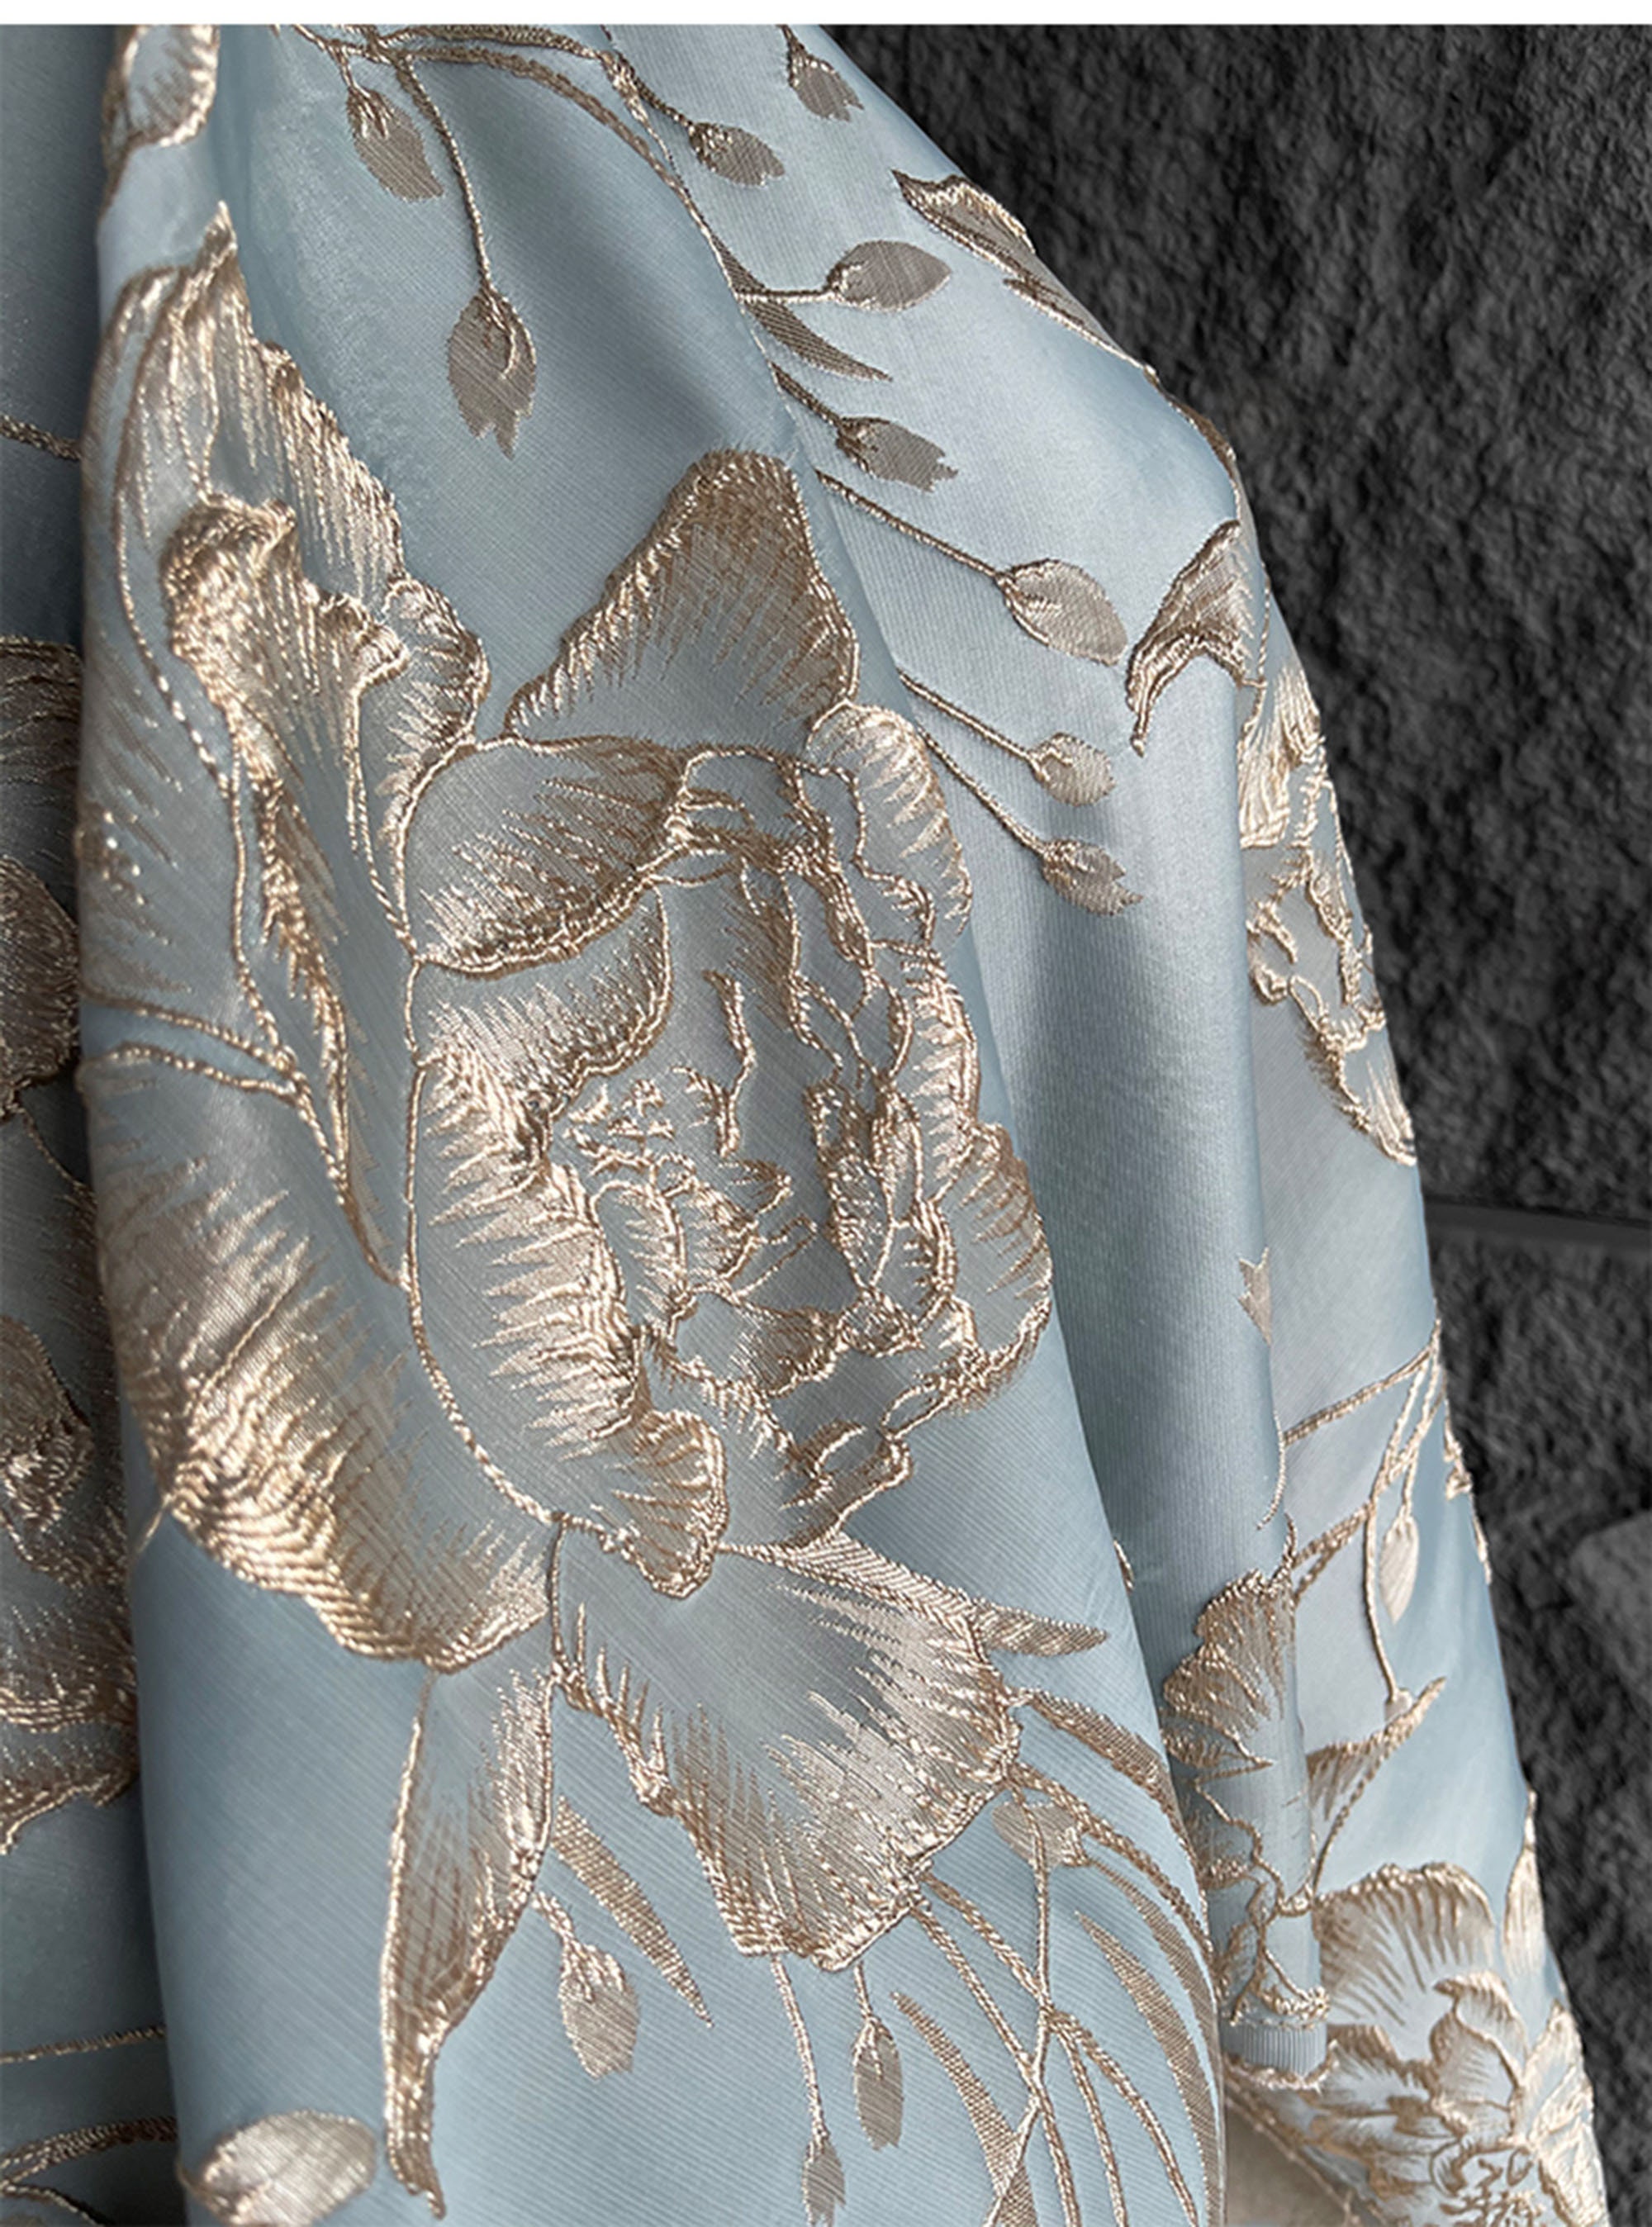 Luxury Gold Embroidered Jacquard Fabric, Embossed Flora Damask Brocade for  Upholstery, Dress DIY Fabric 57 Inches Width 